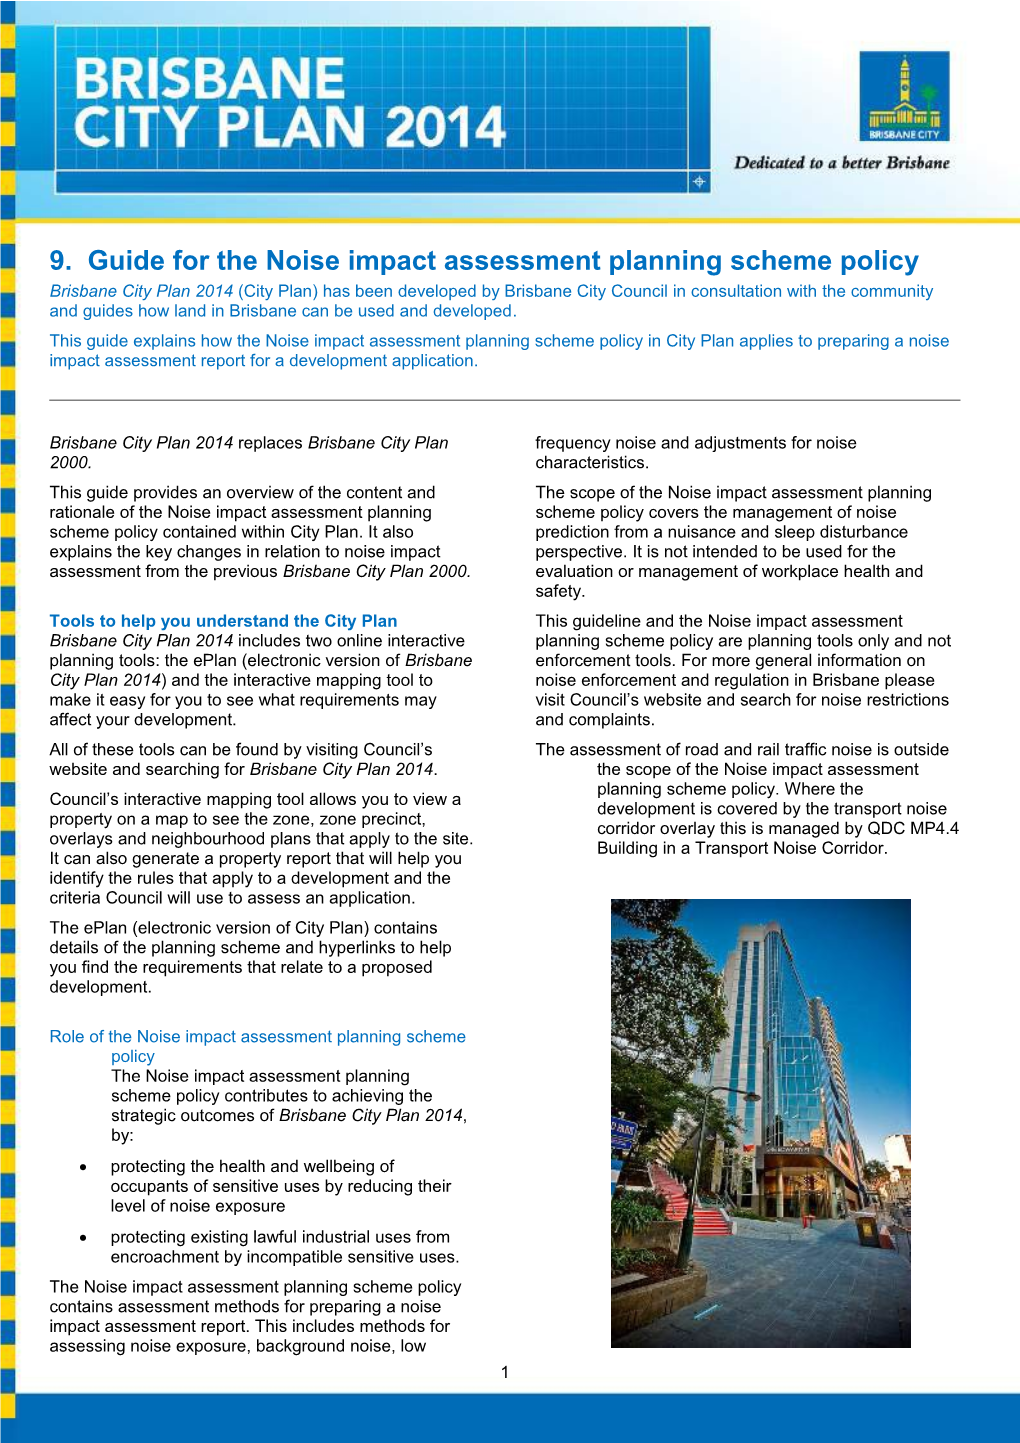 9. Guide for the Noise Impact Assessment Planning Scheme Policy